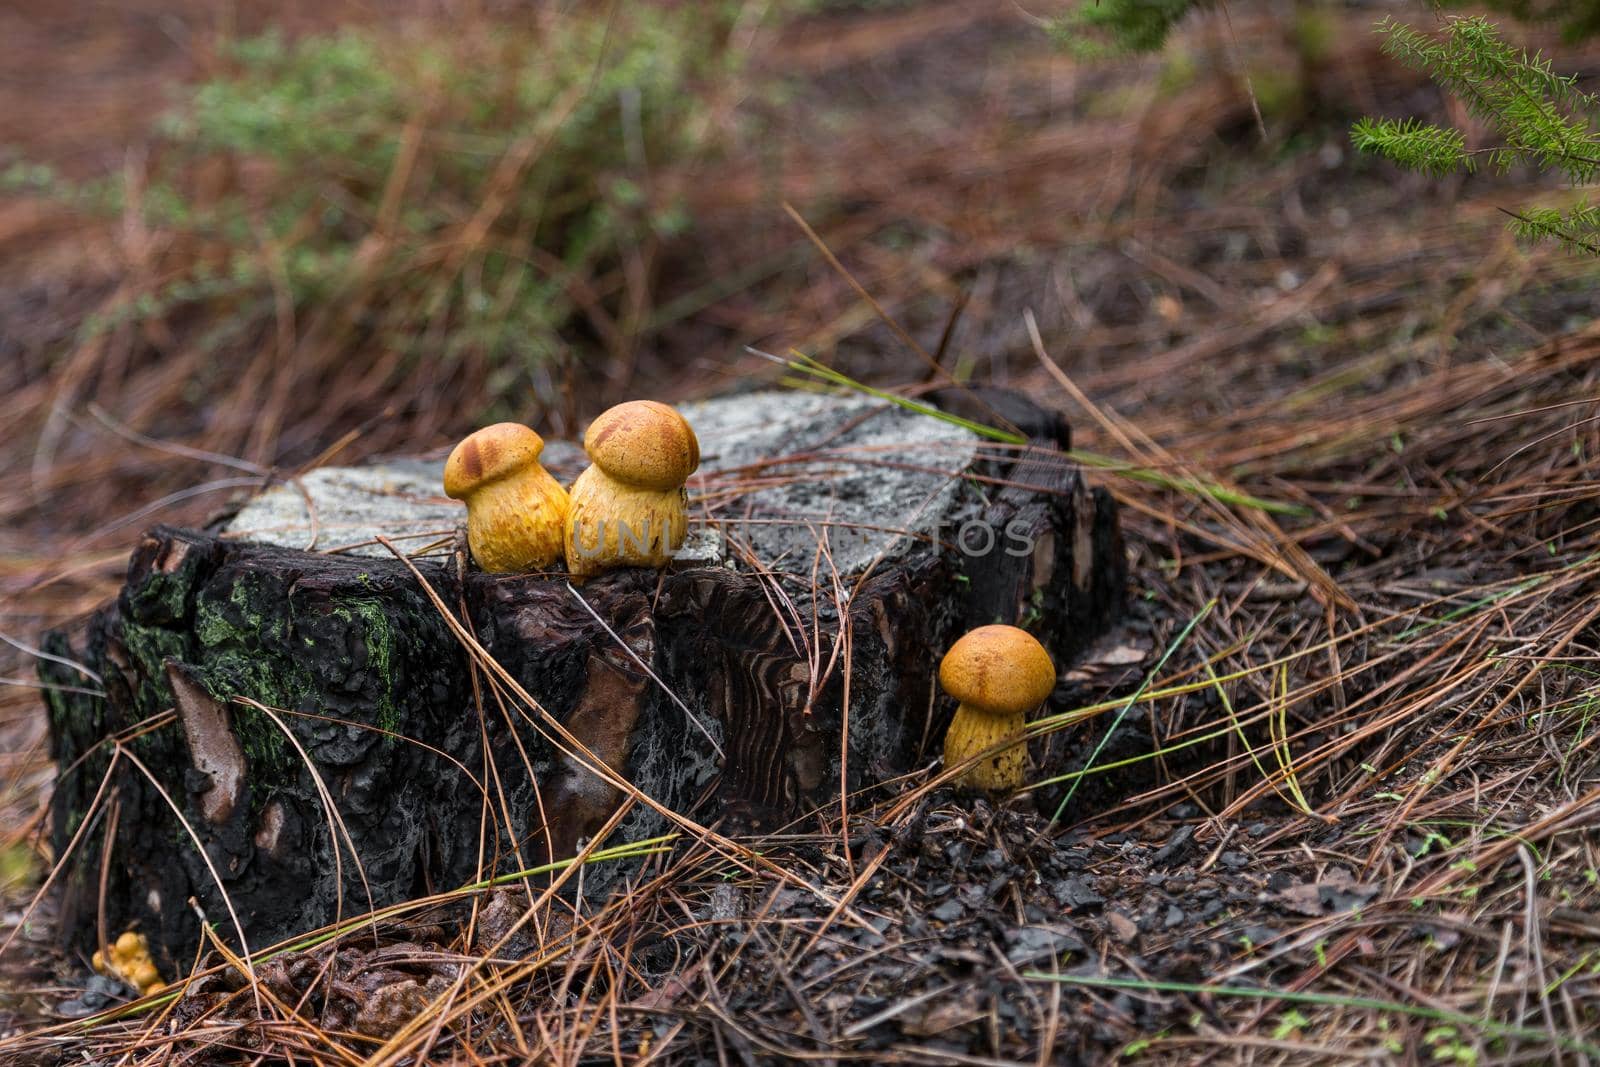 Group of poisonous inedible mushrooms on a stump among dry needles in the forest.